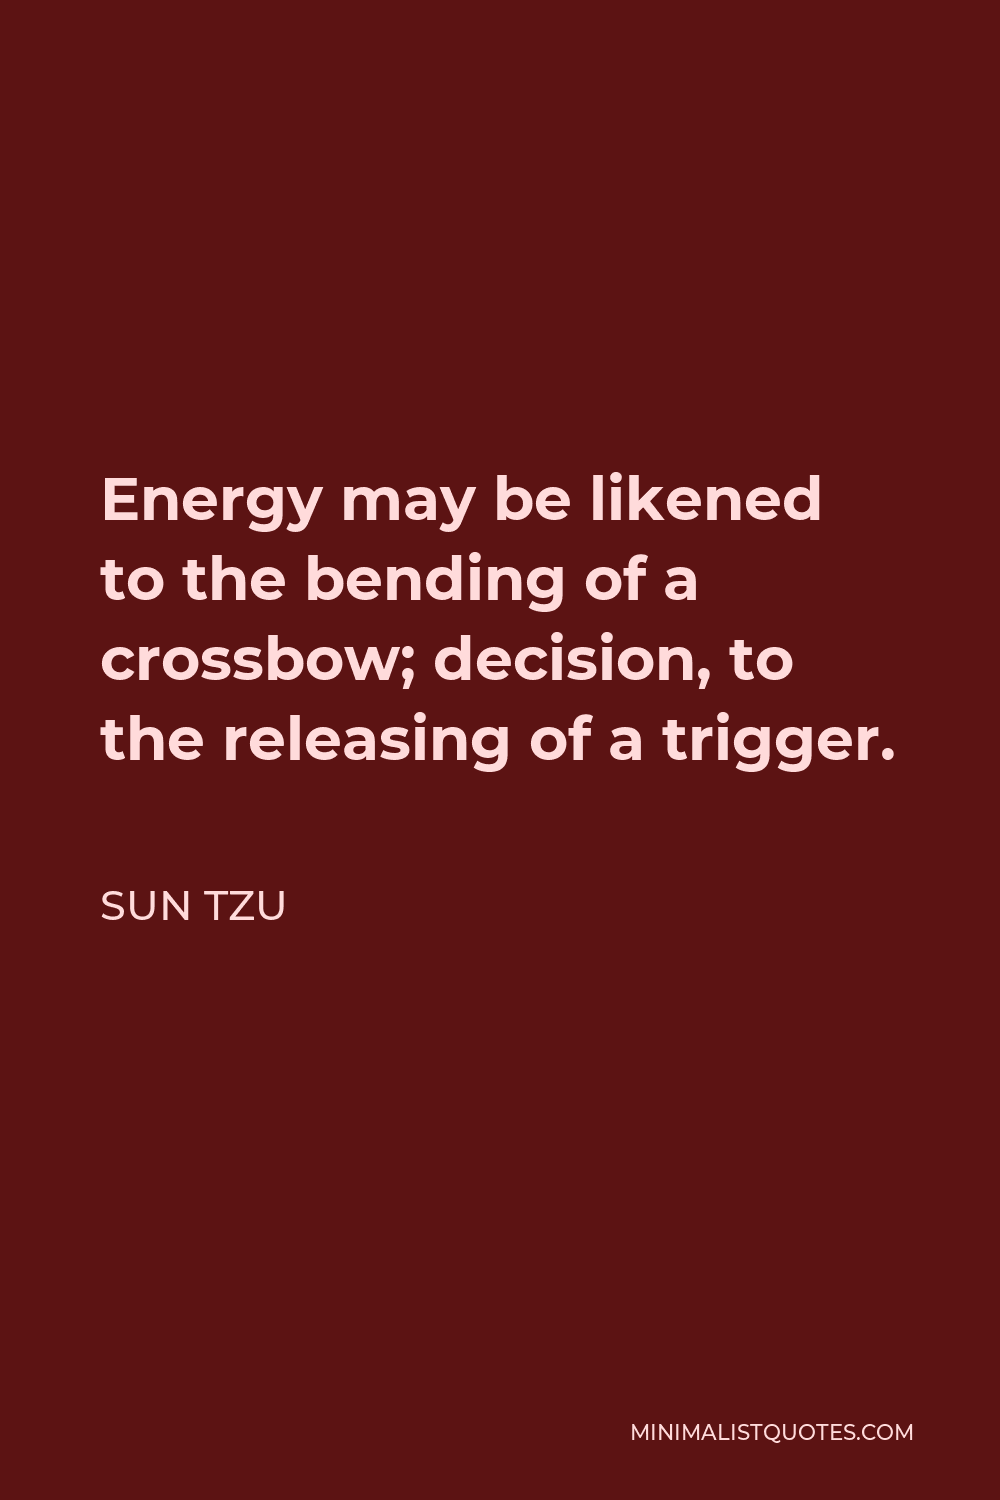 Sun Tzu Quote - Energy may be likened to the bending of a crossbow; decision, to the releasing of a trigger.